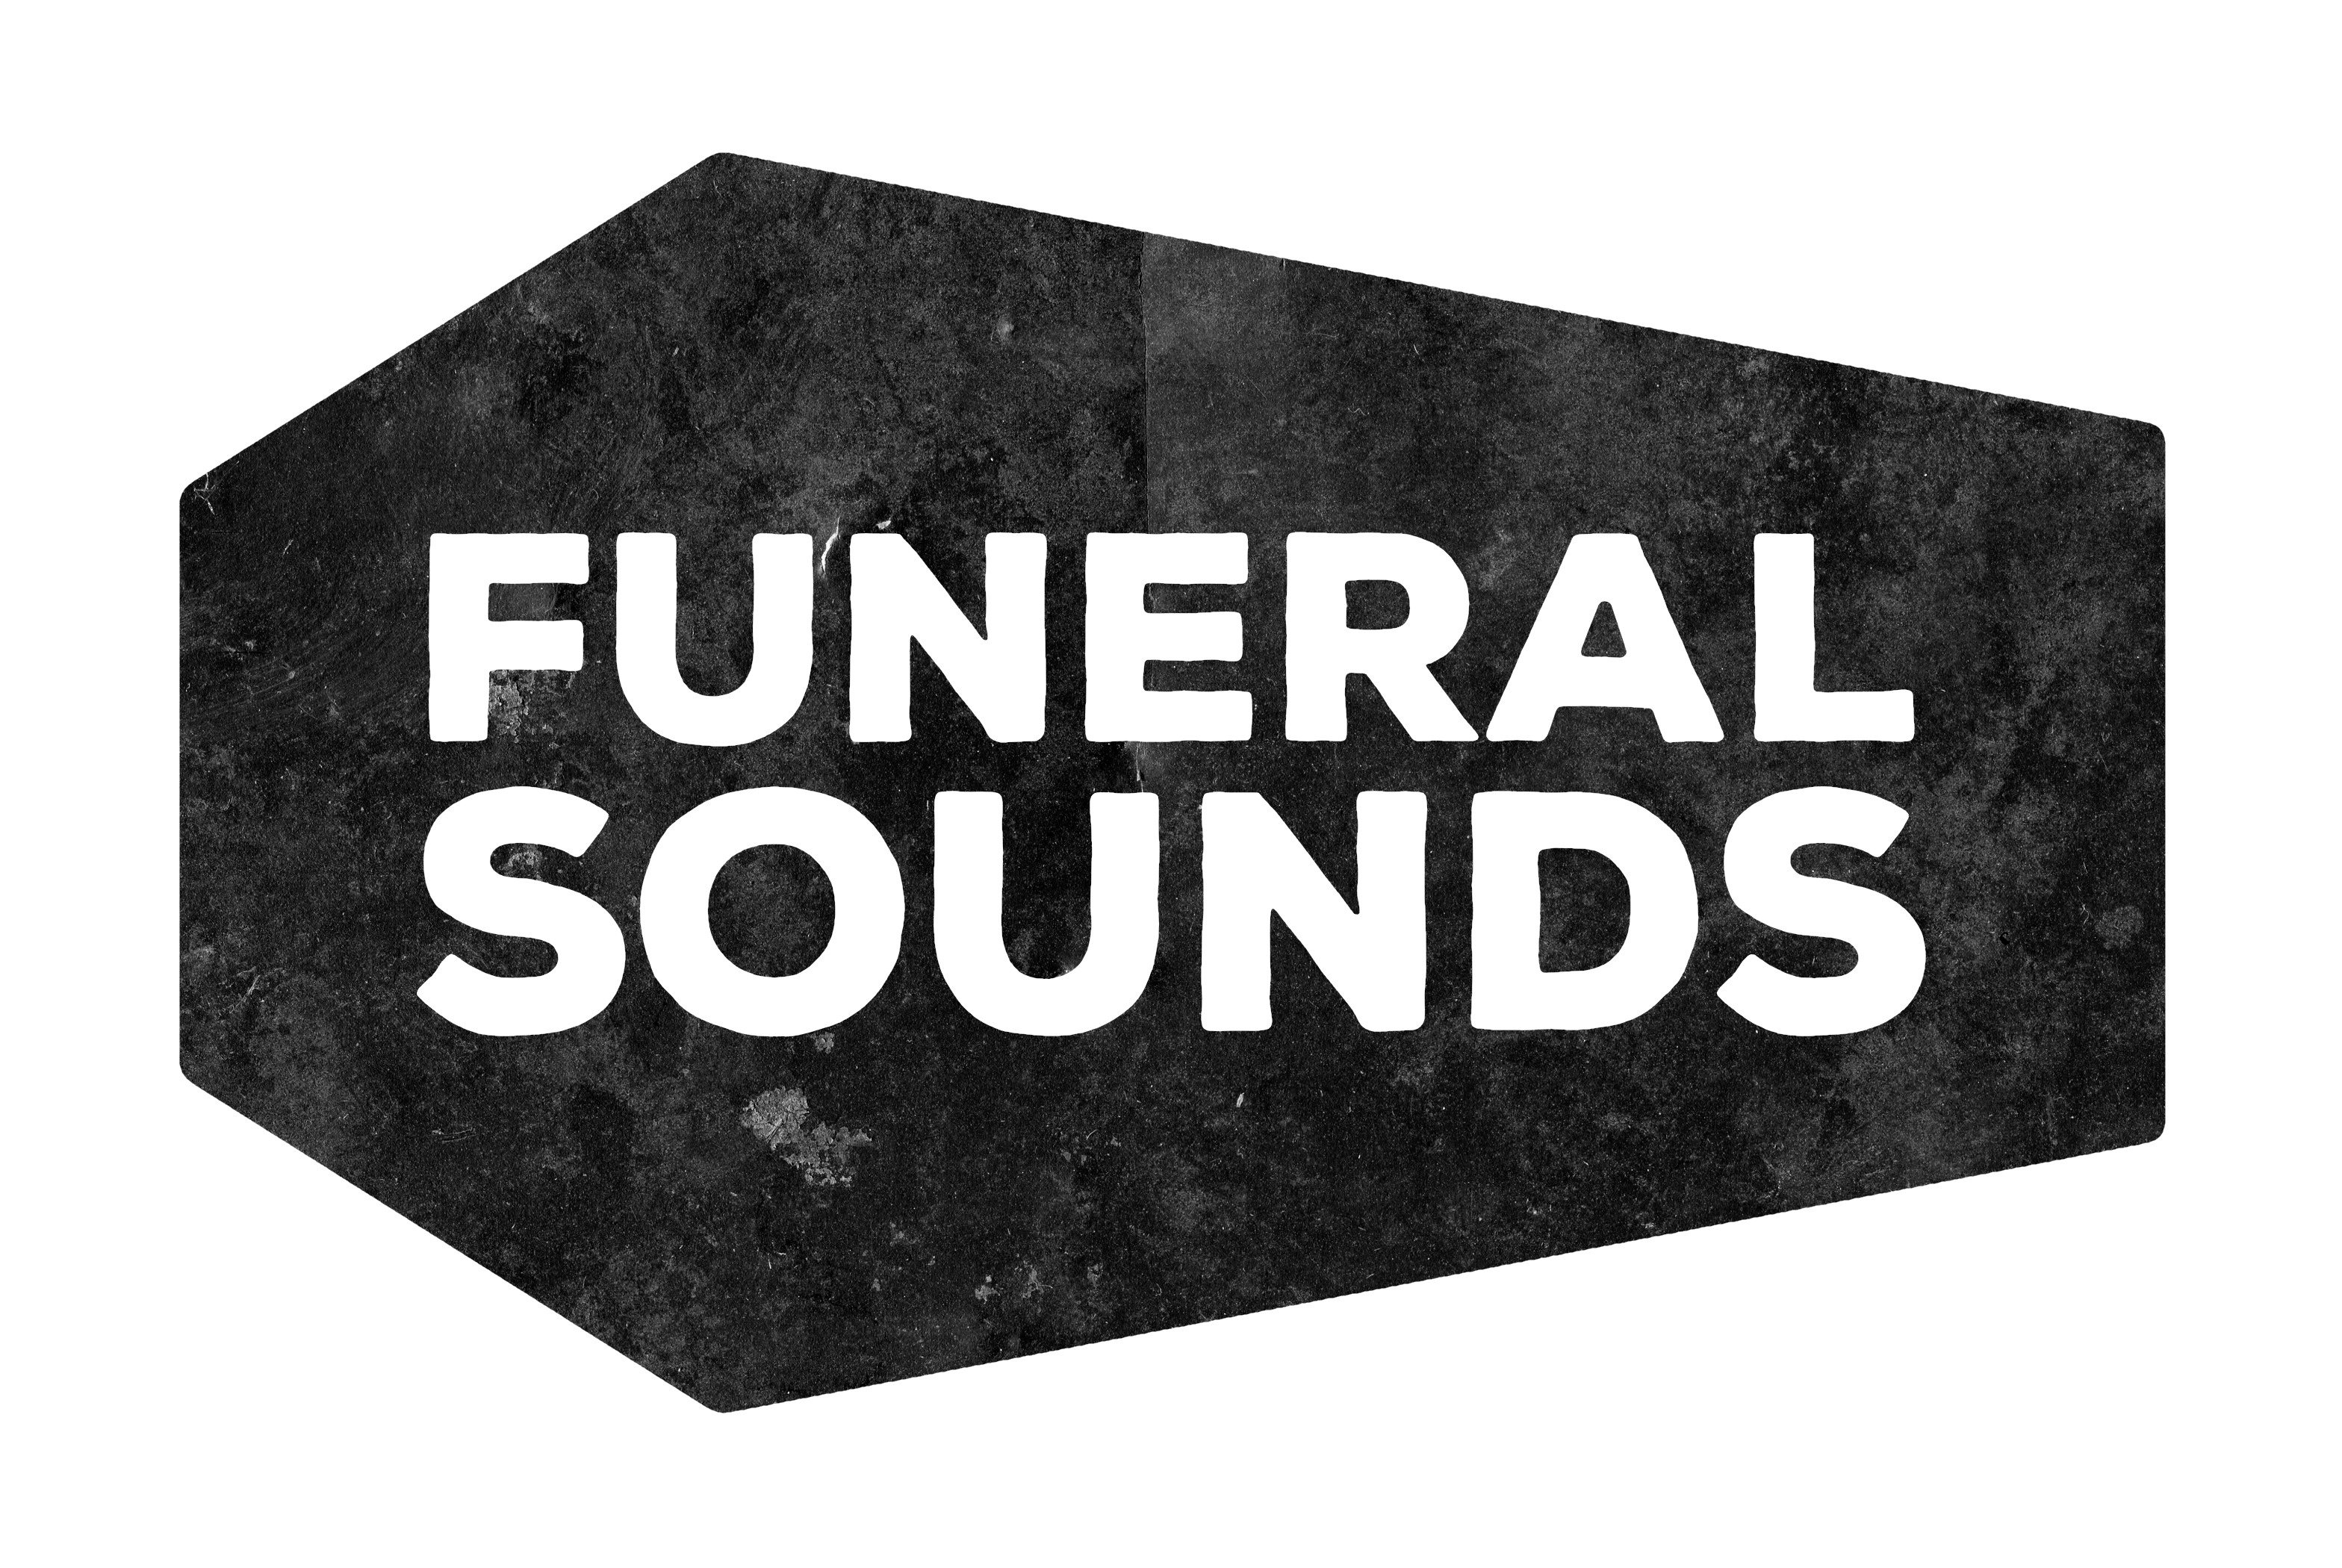 FUNERAL SOUNDS LOGO NO BACKGROUND HOLLOW LETTERS